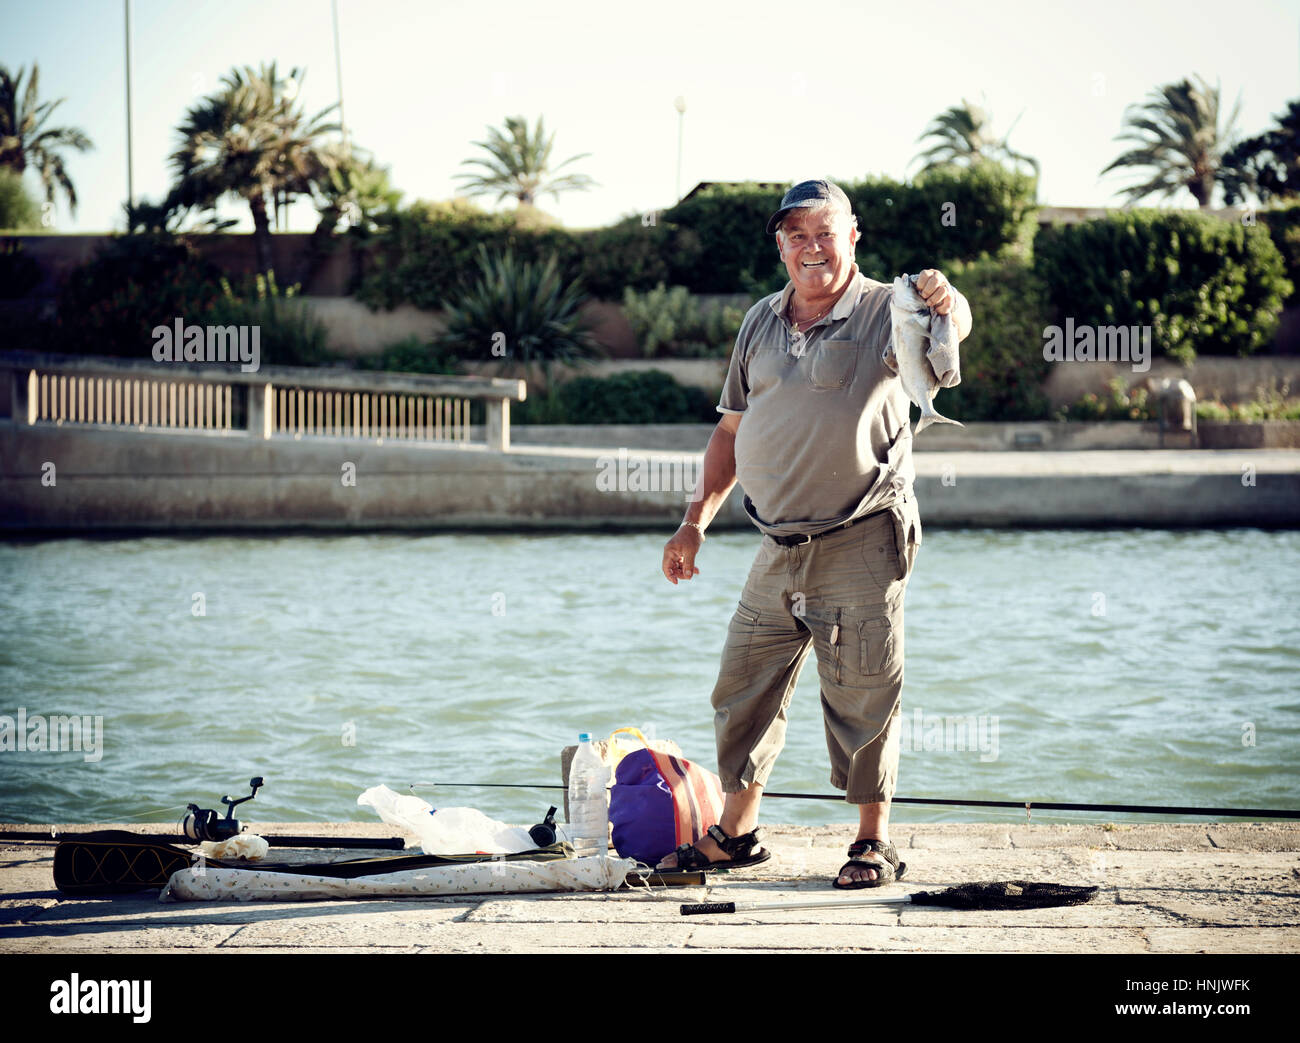 Man fishing in the artificial lake of Palma De Mallorca near the cathedral. Stock Photo